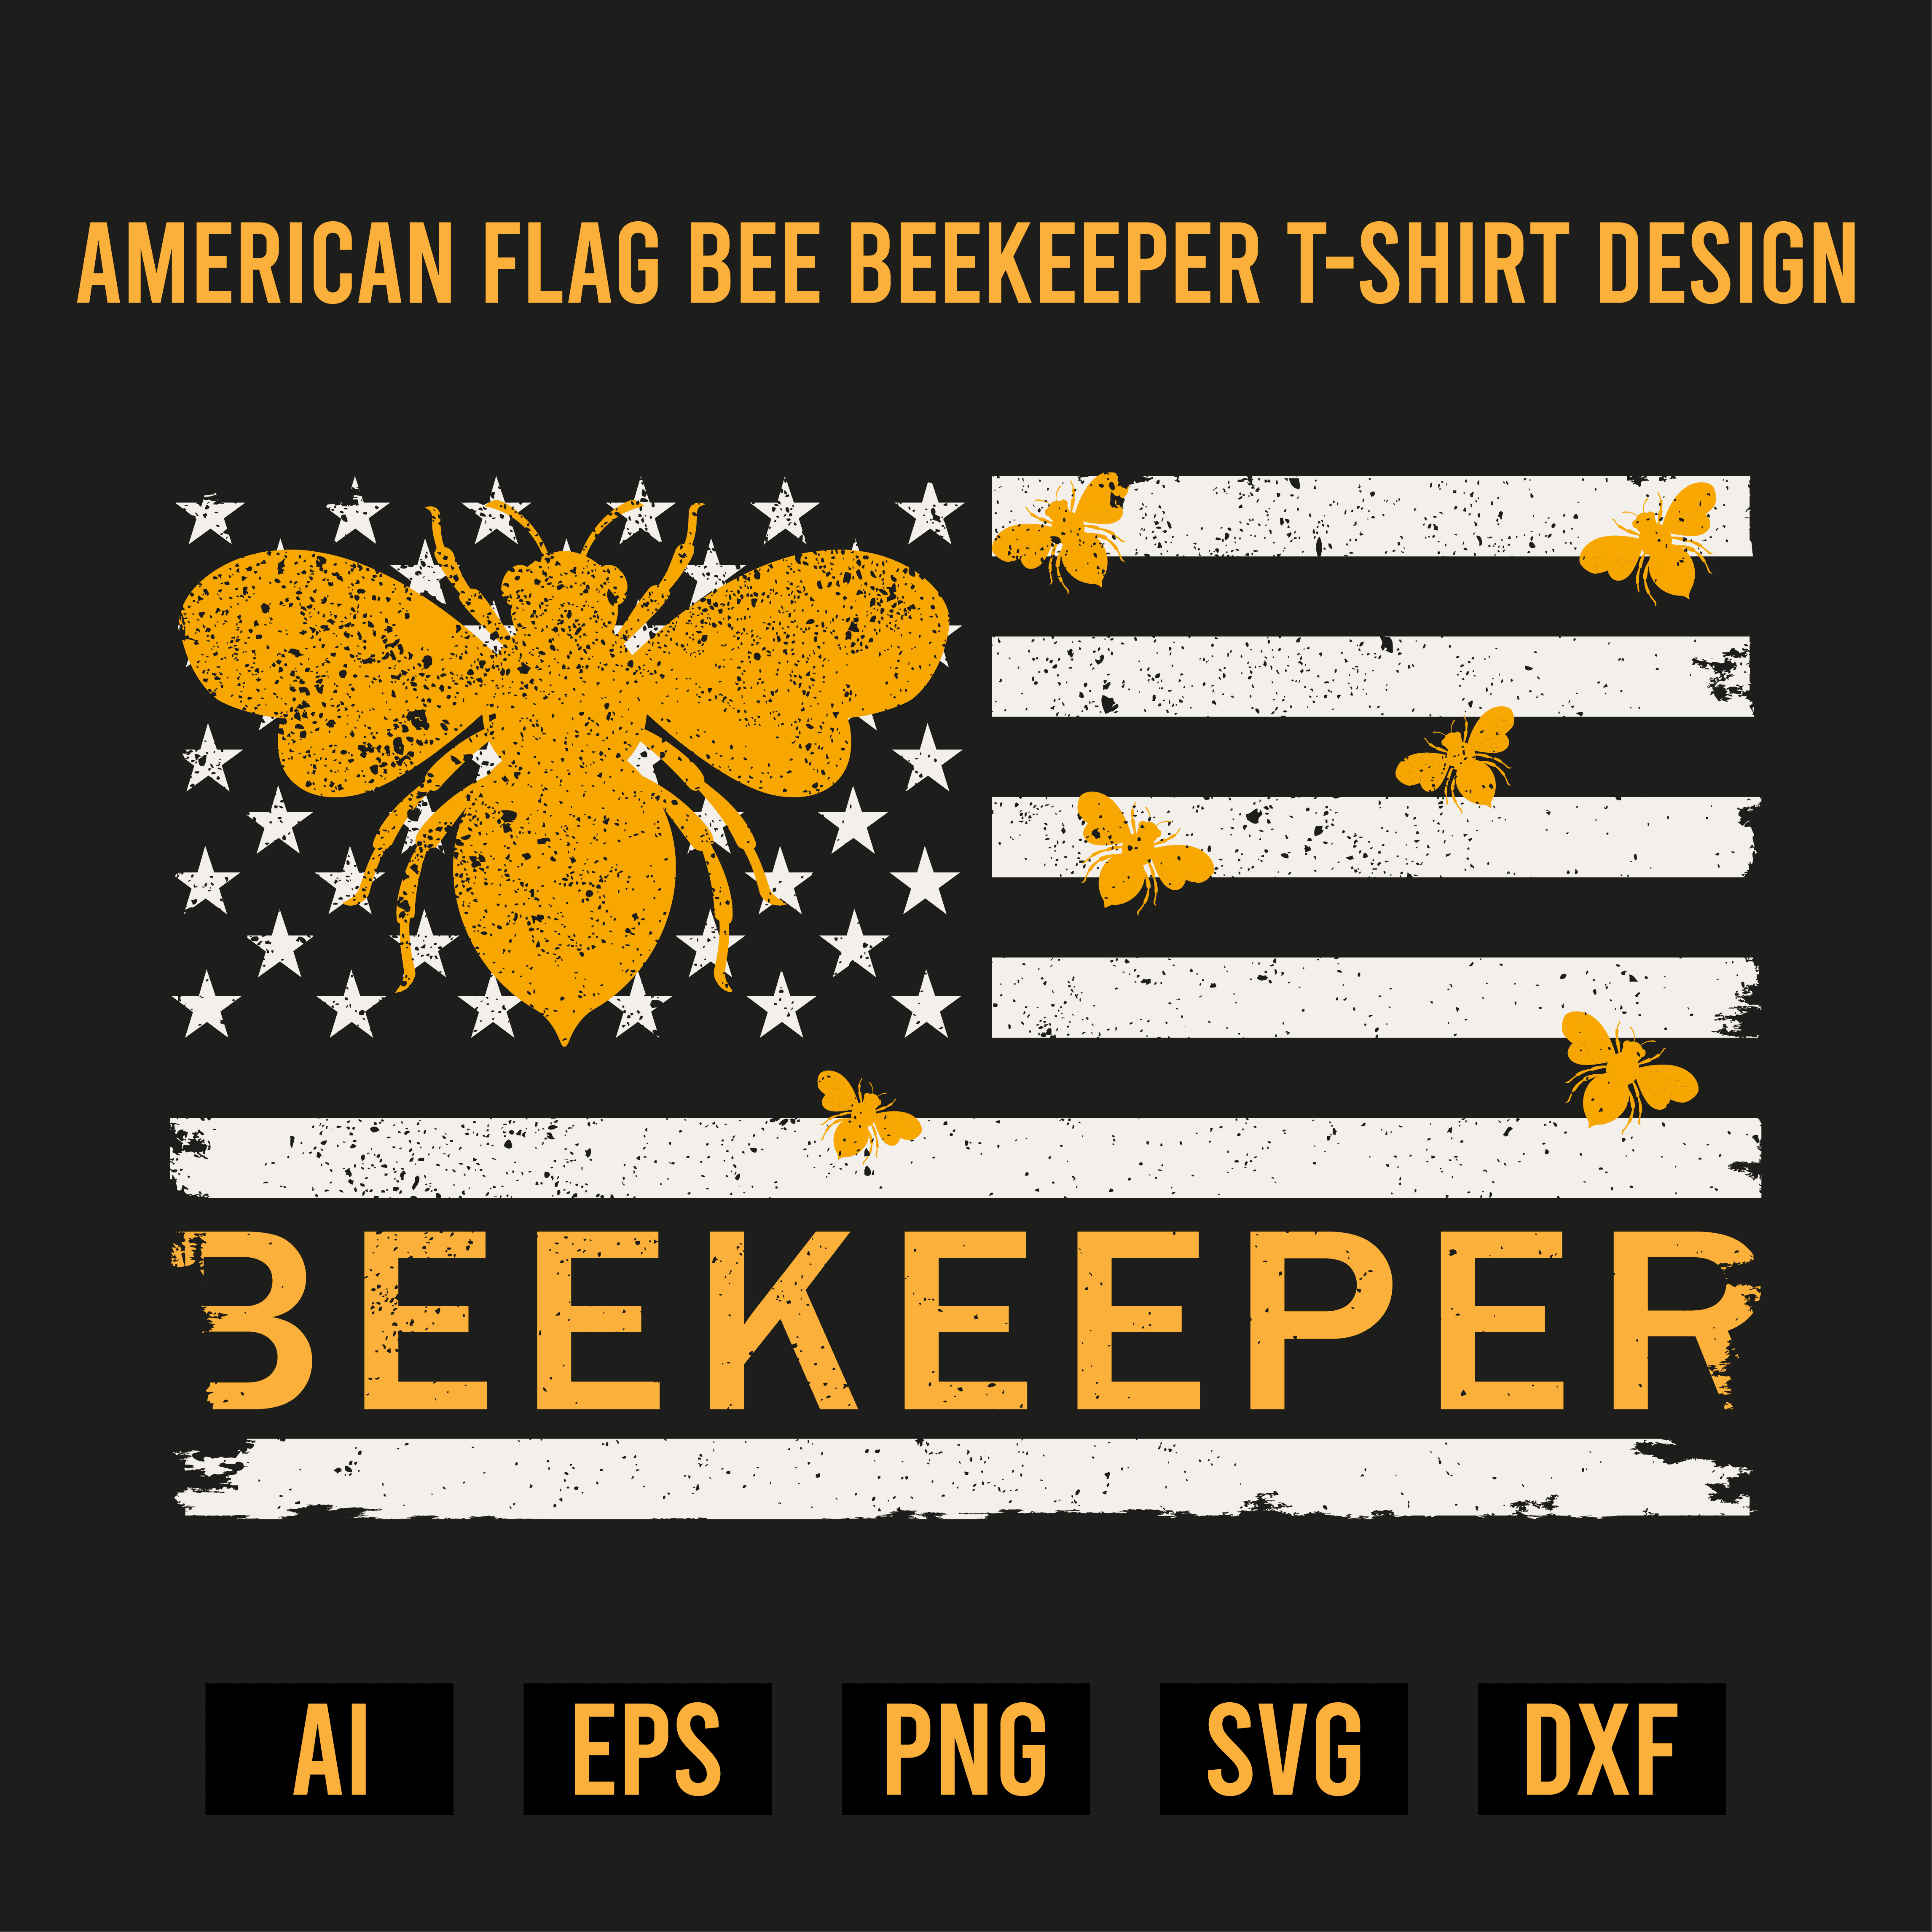 American Flag Bee Beekeeper T- Shirt Design cover image.